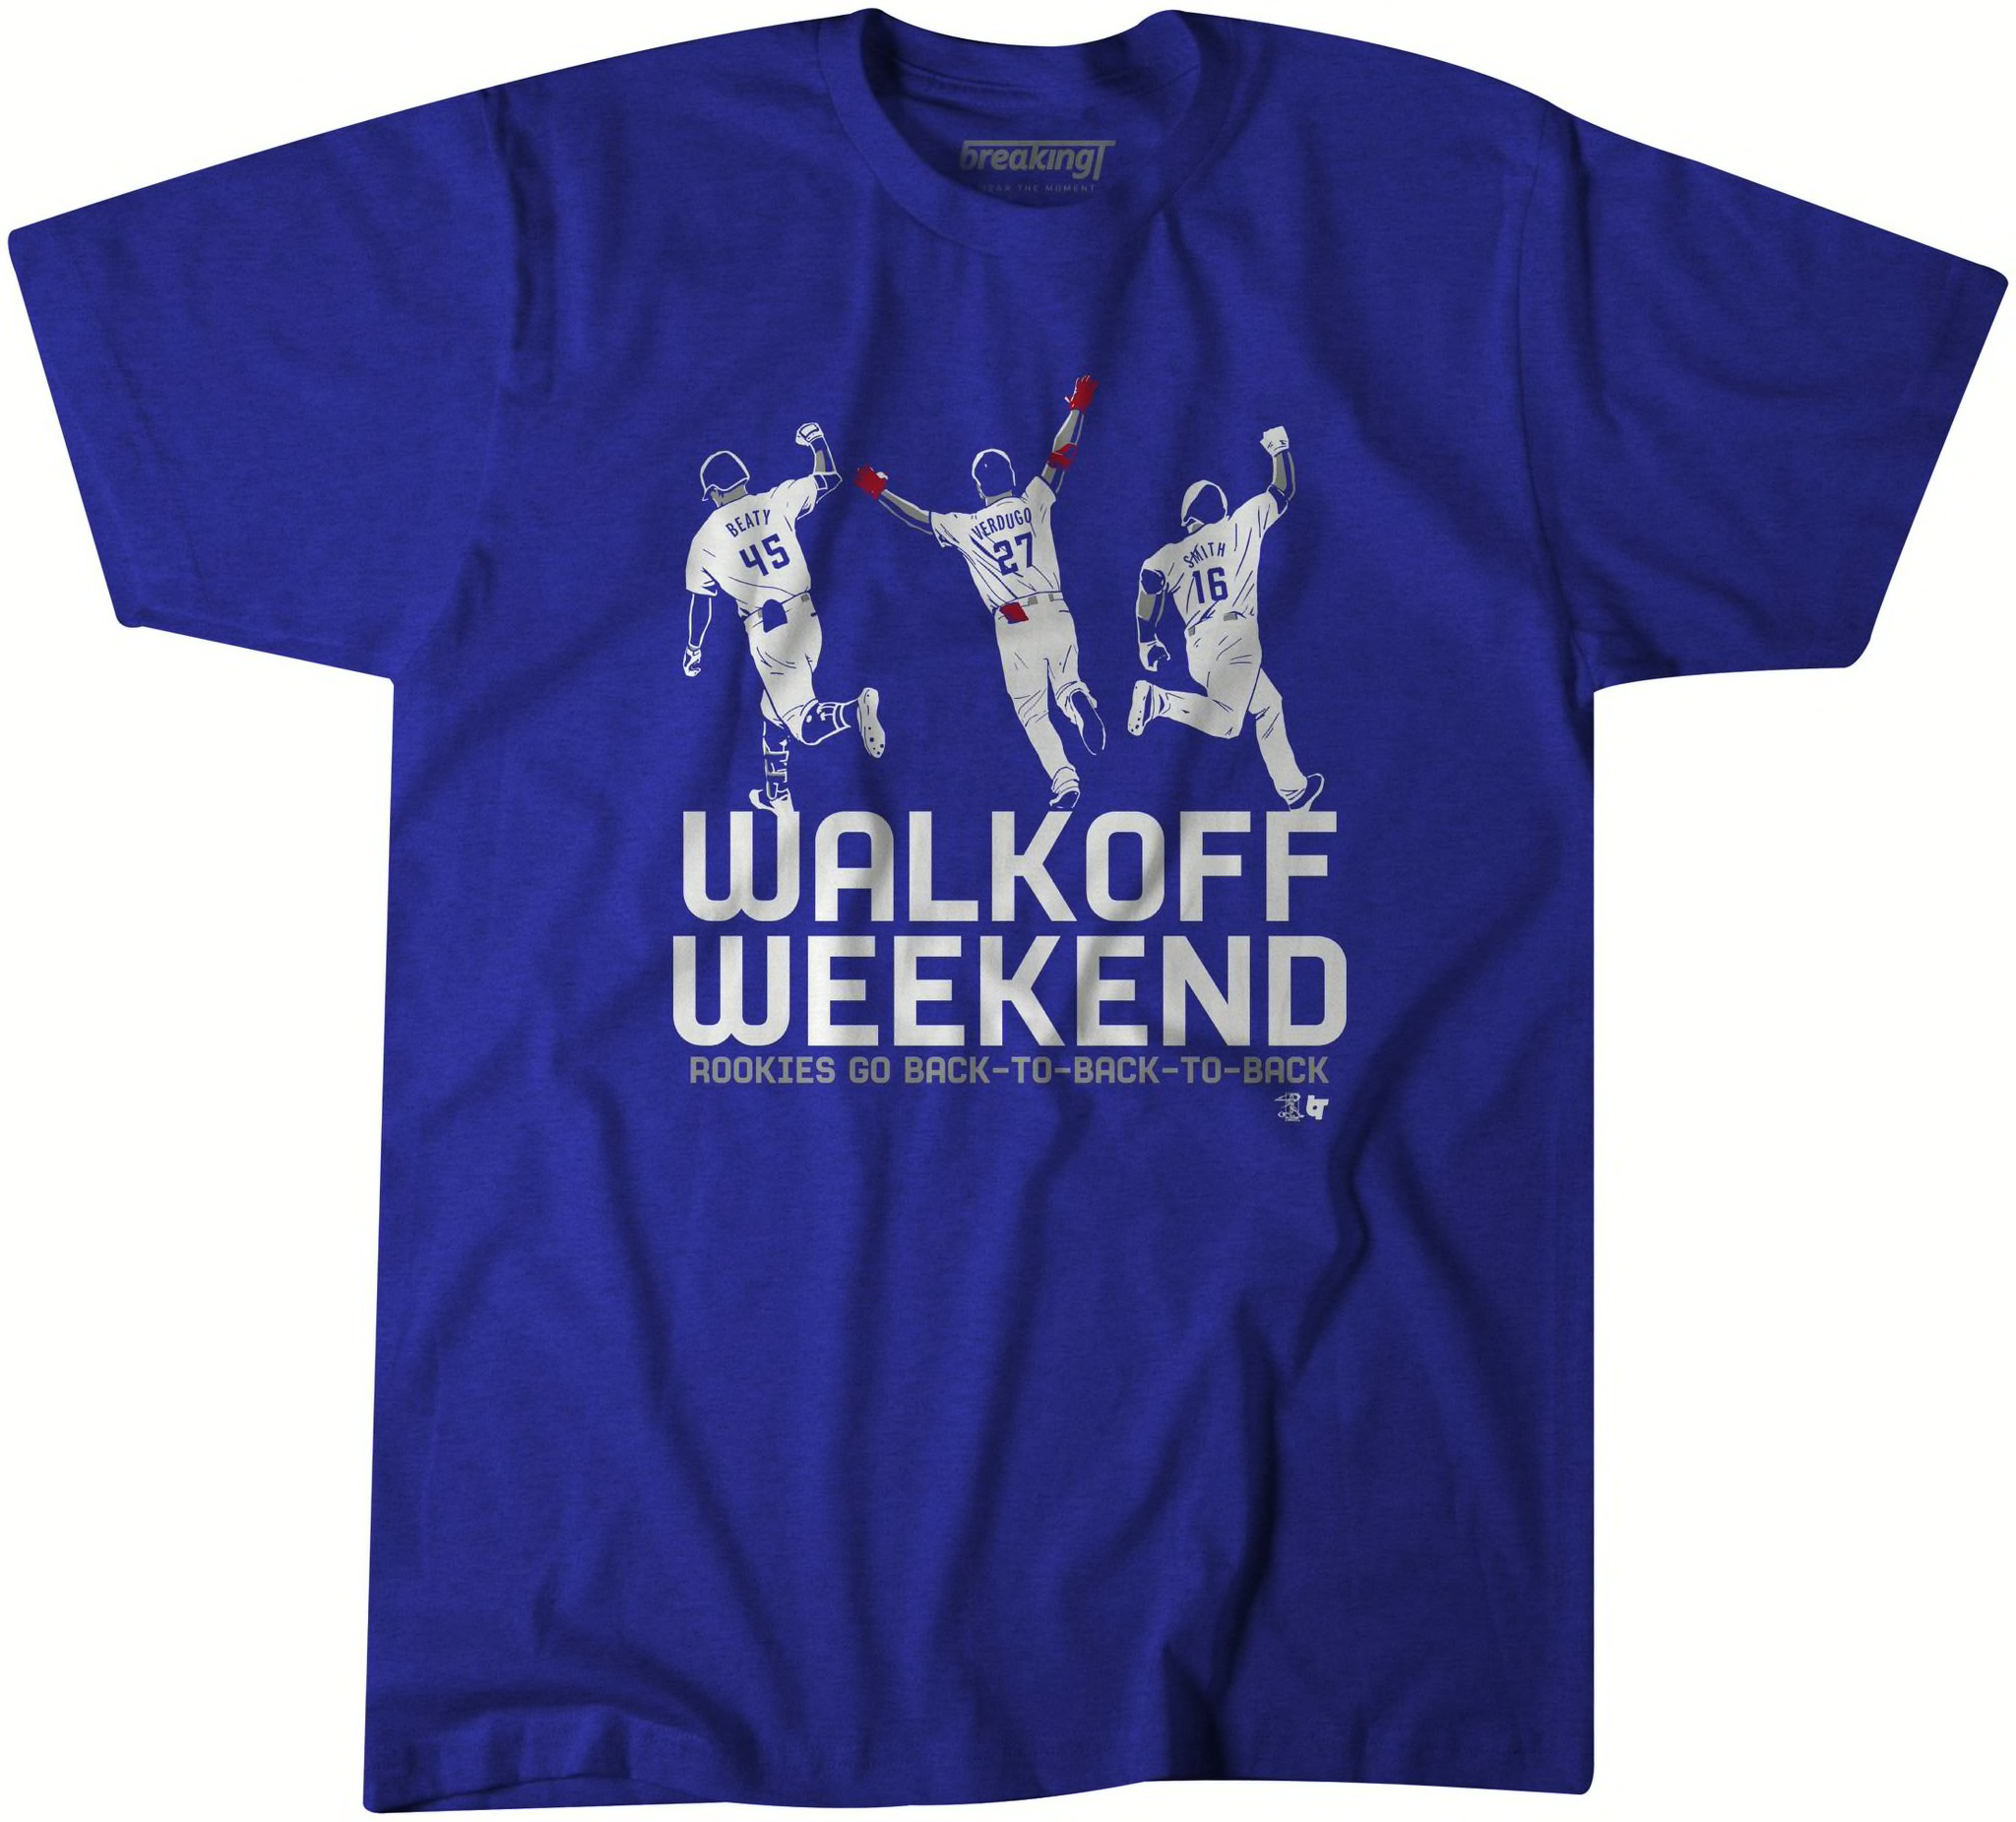 Los Angeles Dodgers fans need this Walkoff Weekend t-shirt